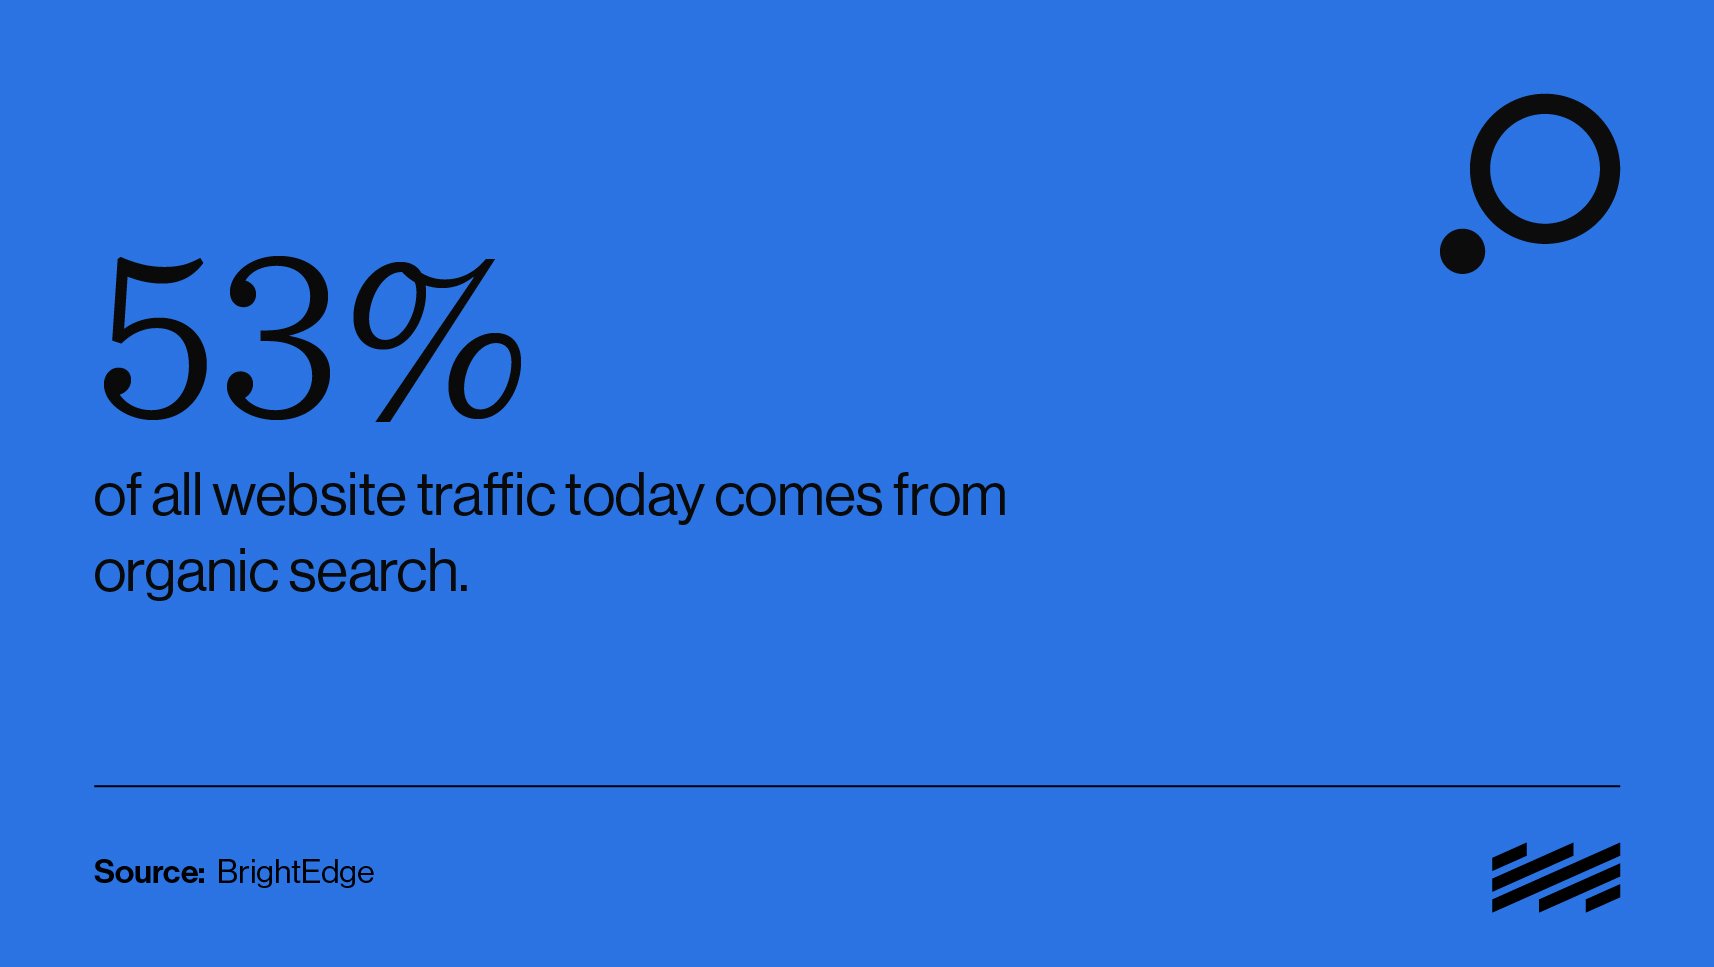 A blue and black graphic treatment of a quote taken directly from the article text that reads 53% of all website traffic today comes from organic search